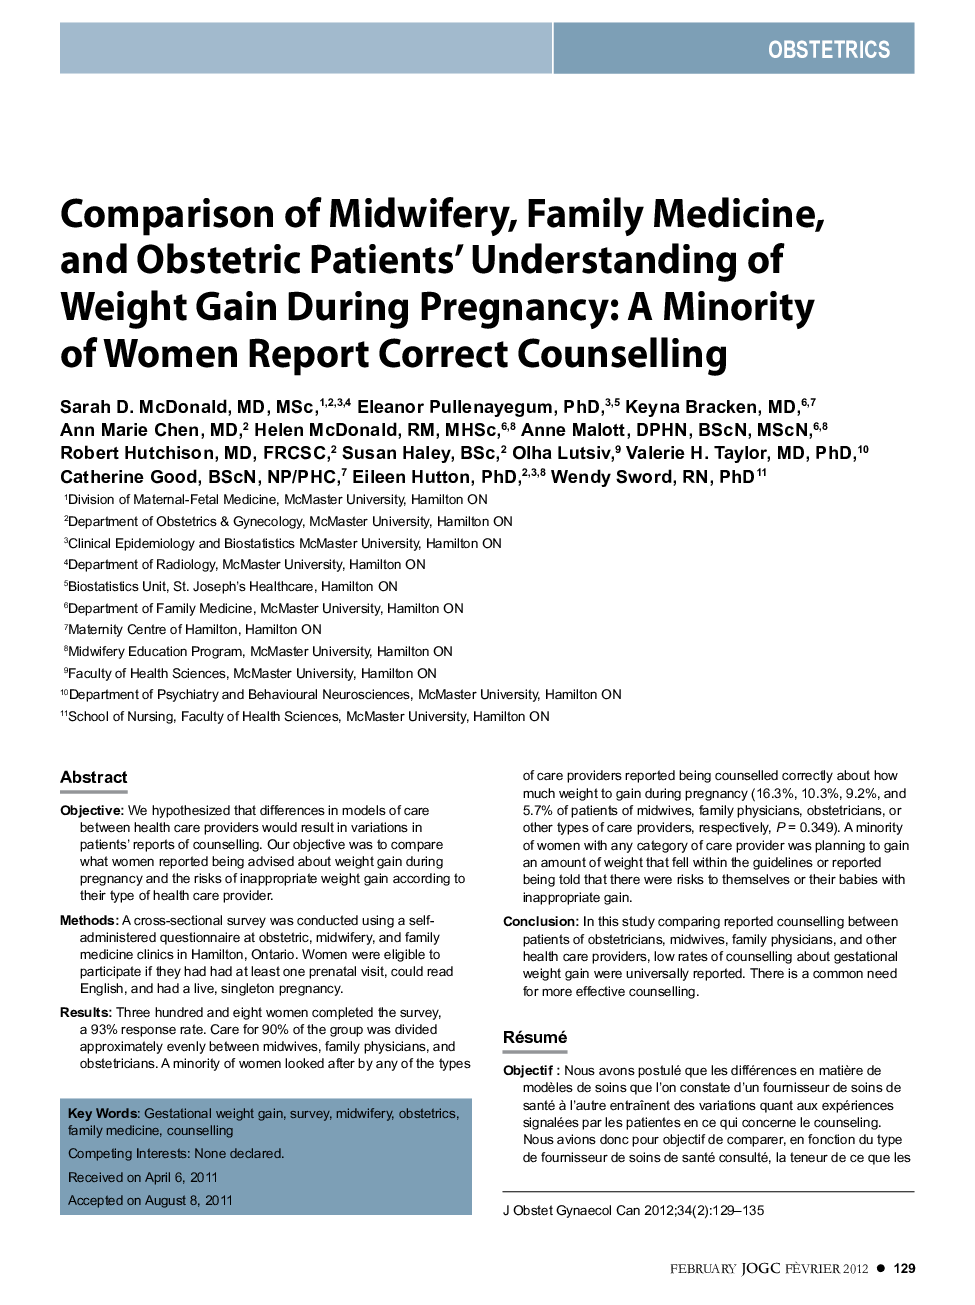 Comparison of Midwifery, Family Medicine, and Obstetric Patients' Understanding of Weight Gain During Pregnancy: A Minority of Women Report Correct Counselling